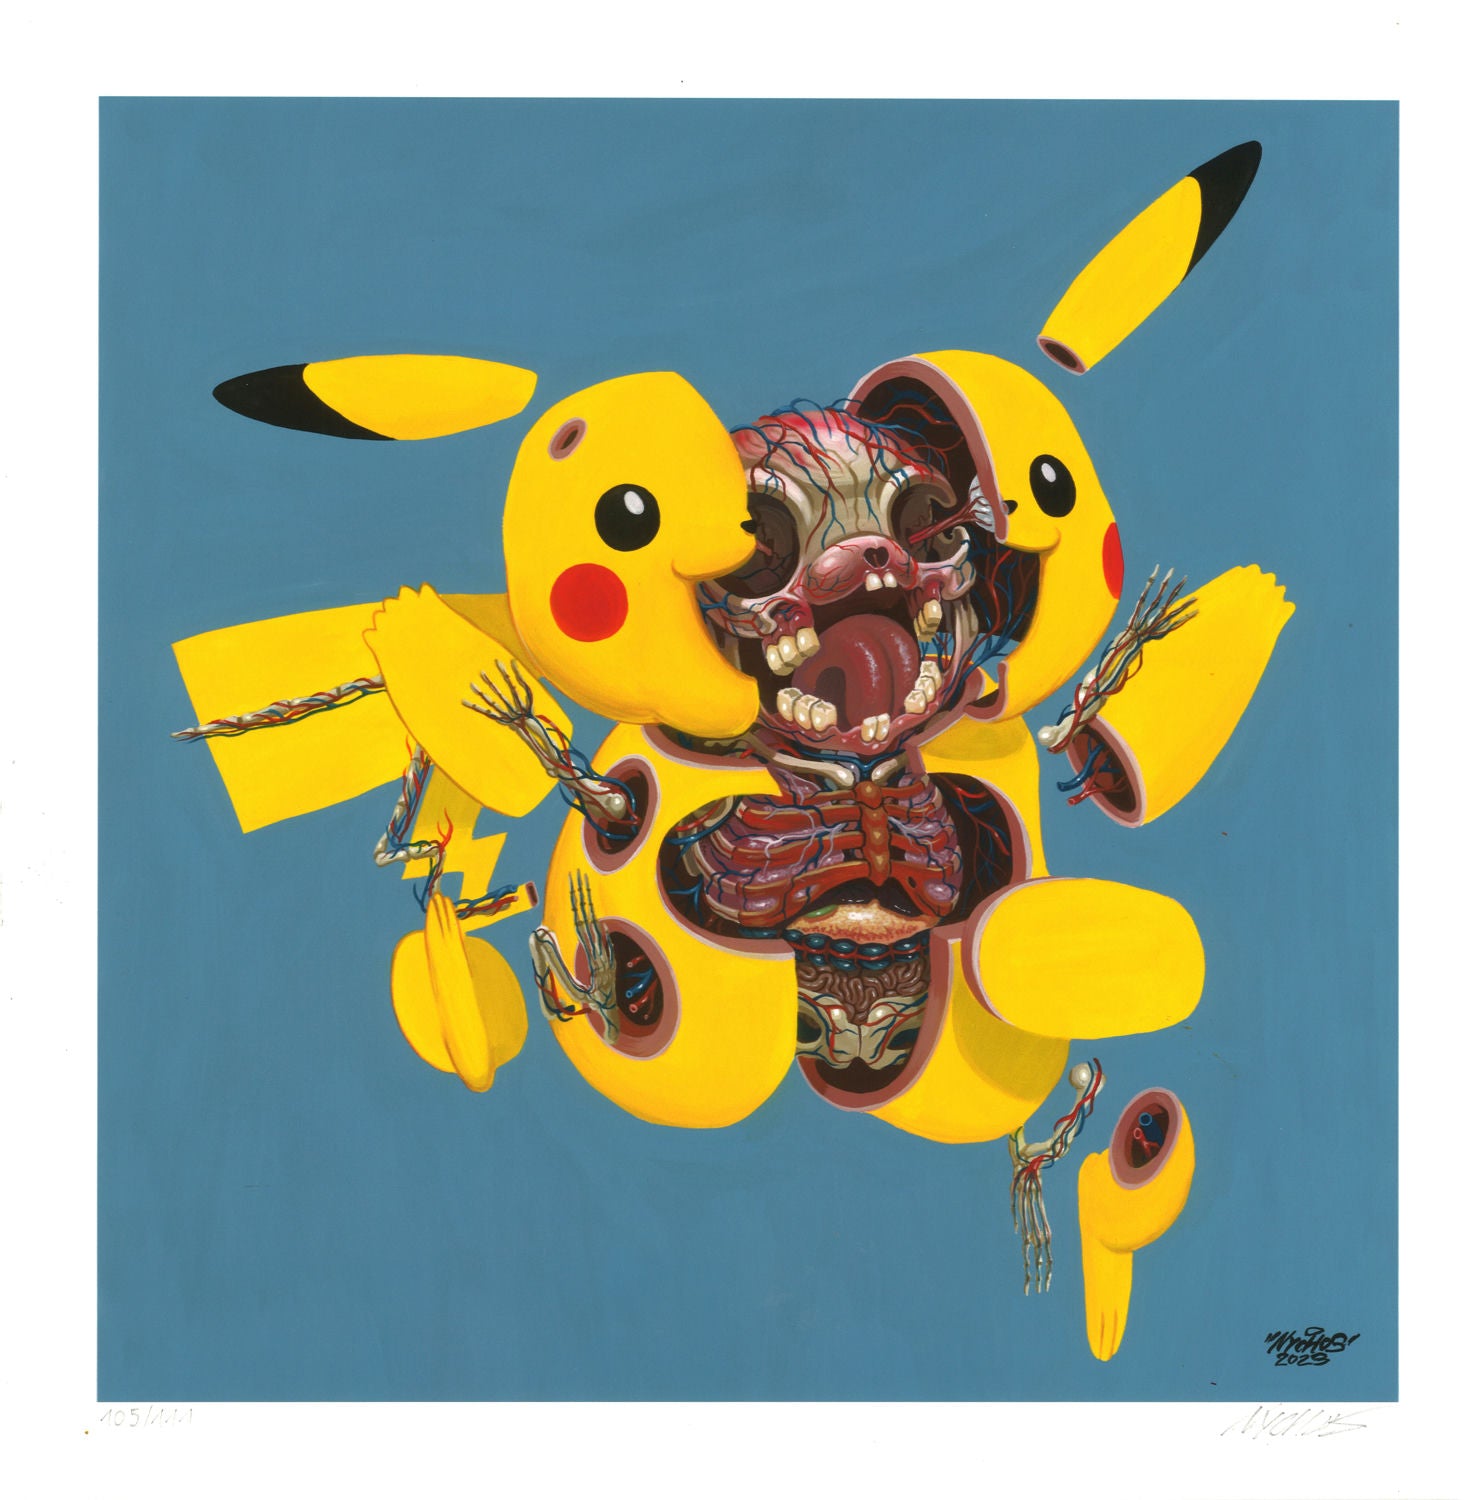 Dissection of Pikachu (small)